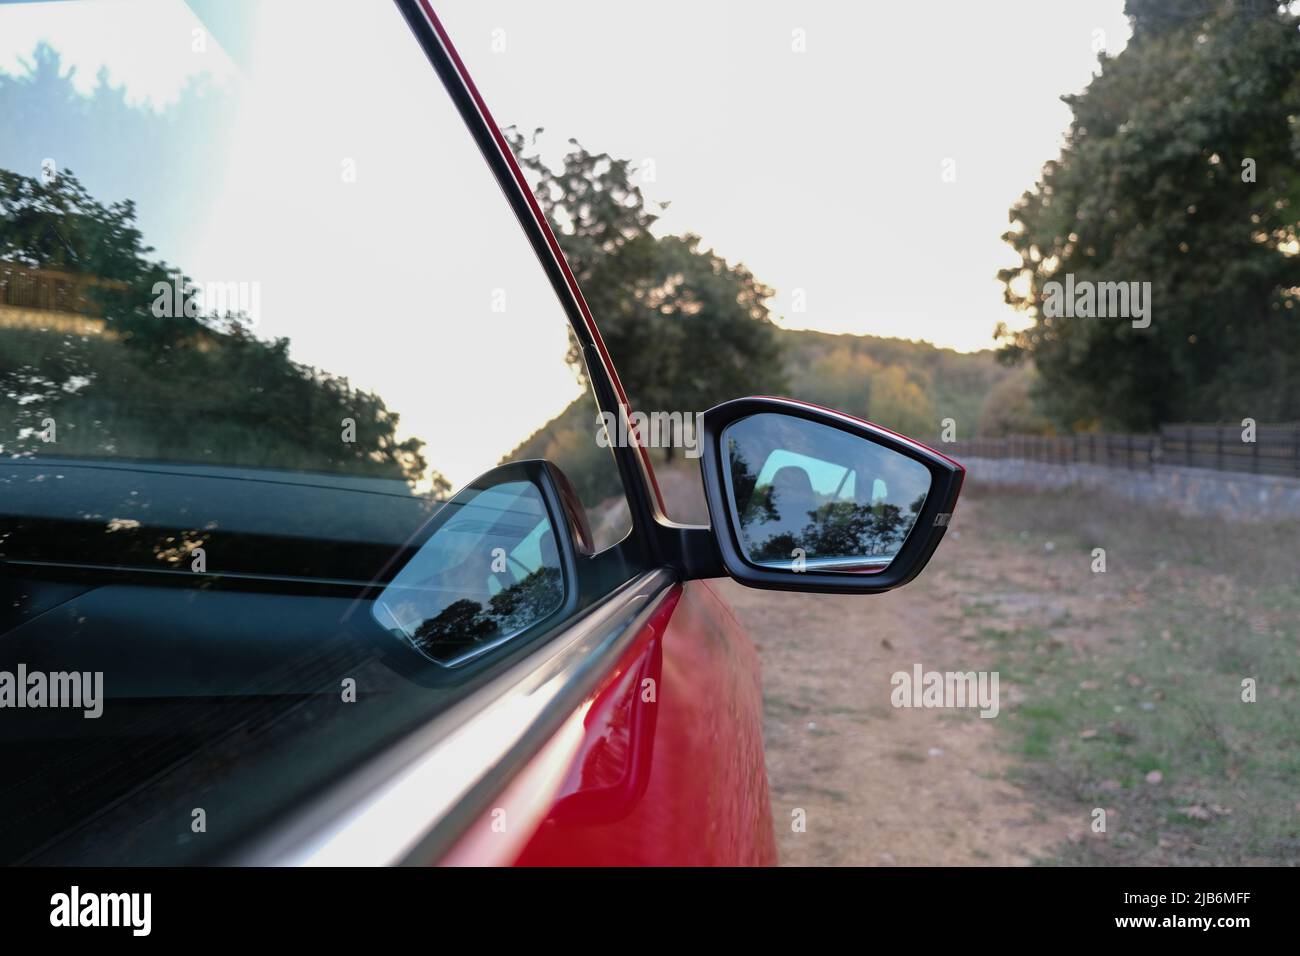 Driving car in the forest. Reflection of in front of car. Stock Photo